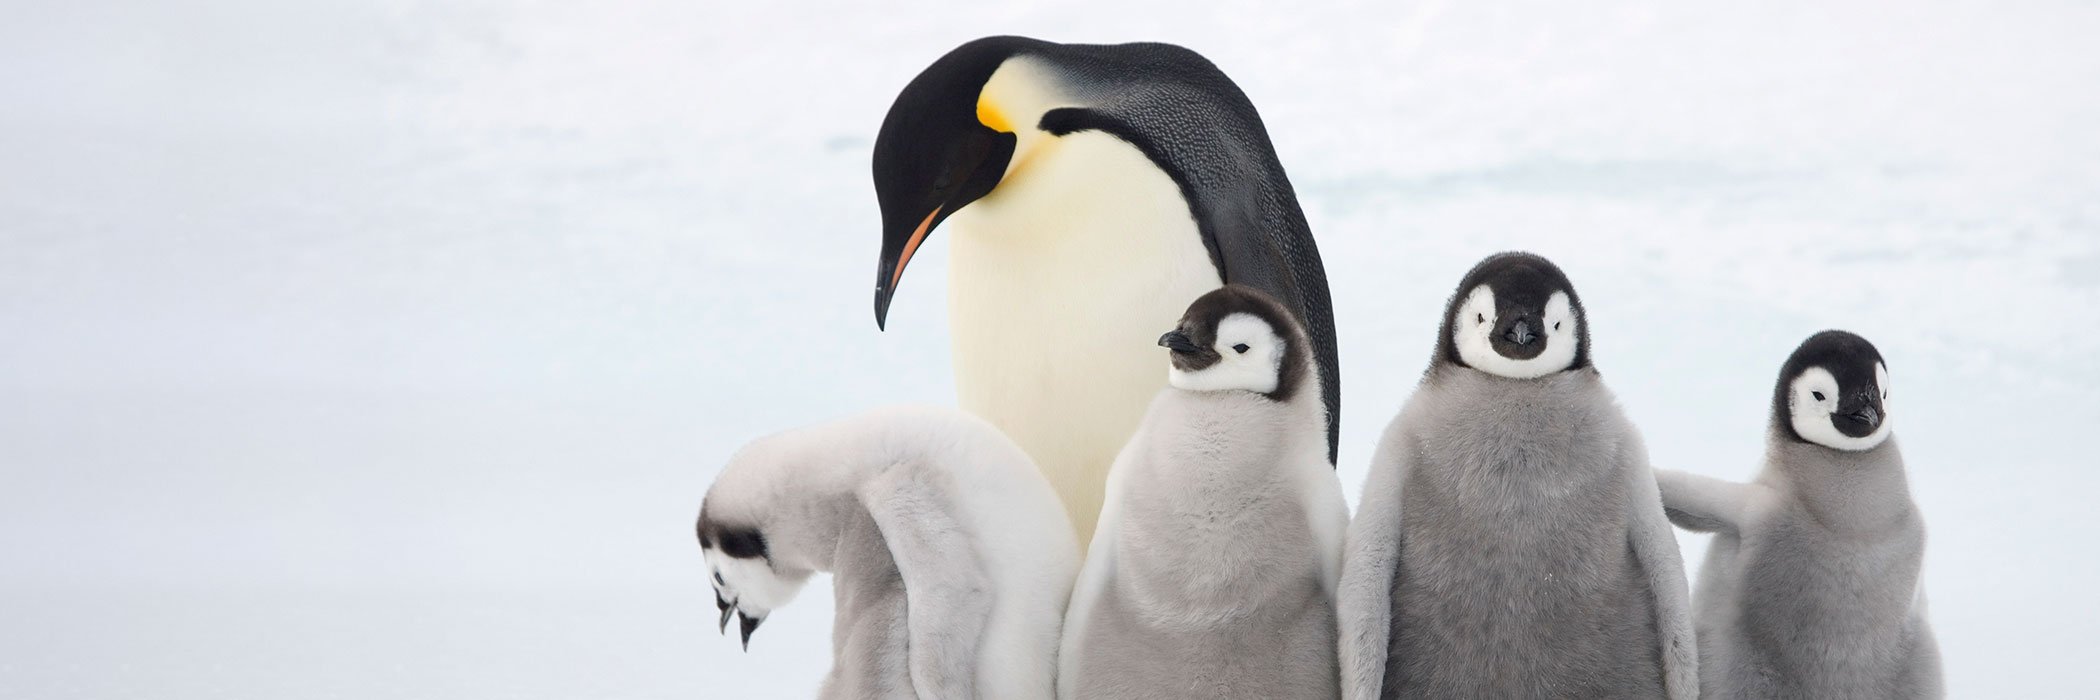 Four Emperor penguin chicks with an adult